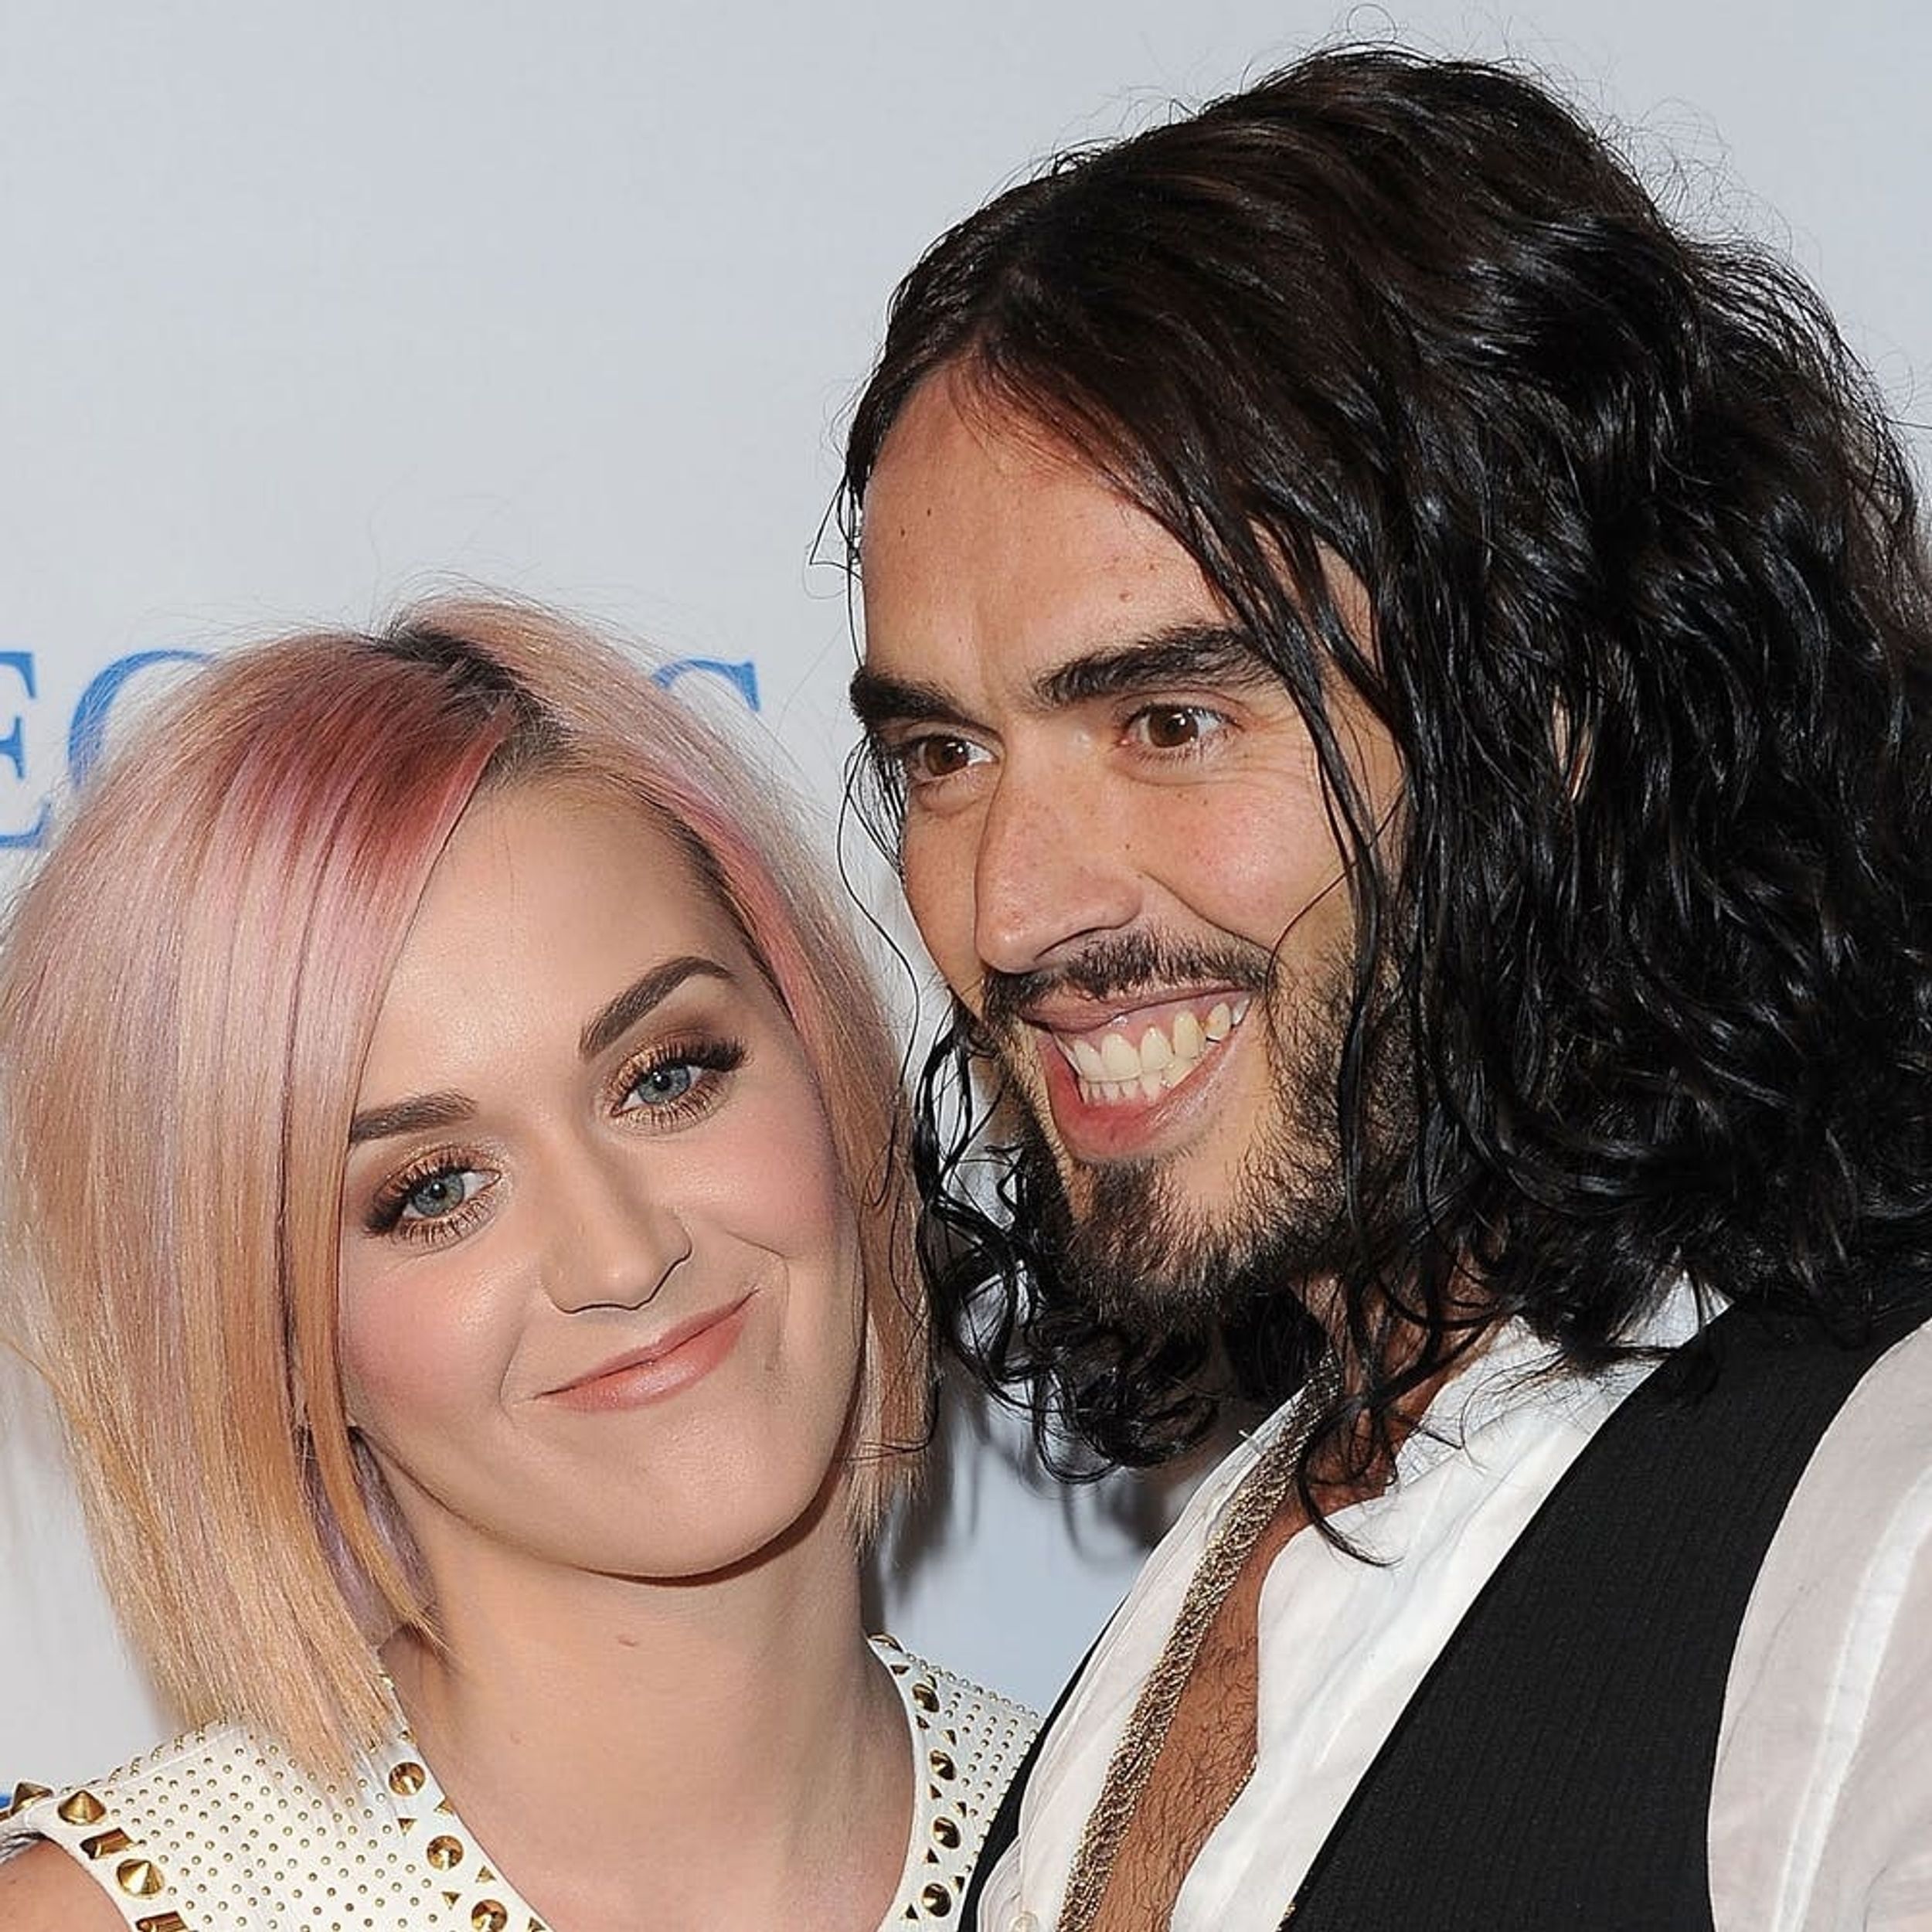 Russell Brand Says He Wants to Reconcile With Ex Katy Perry